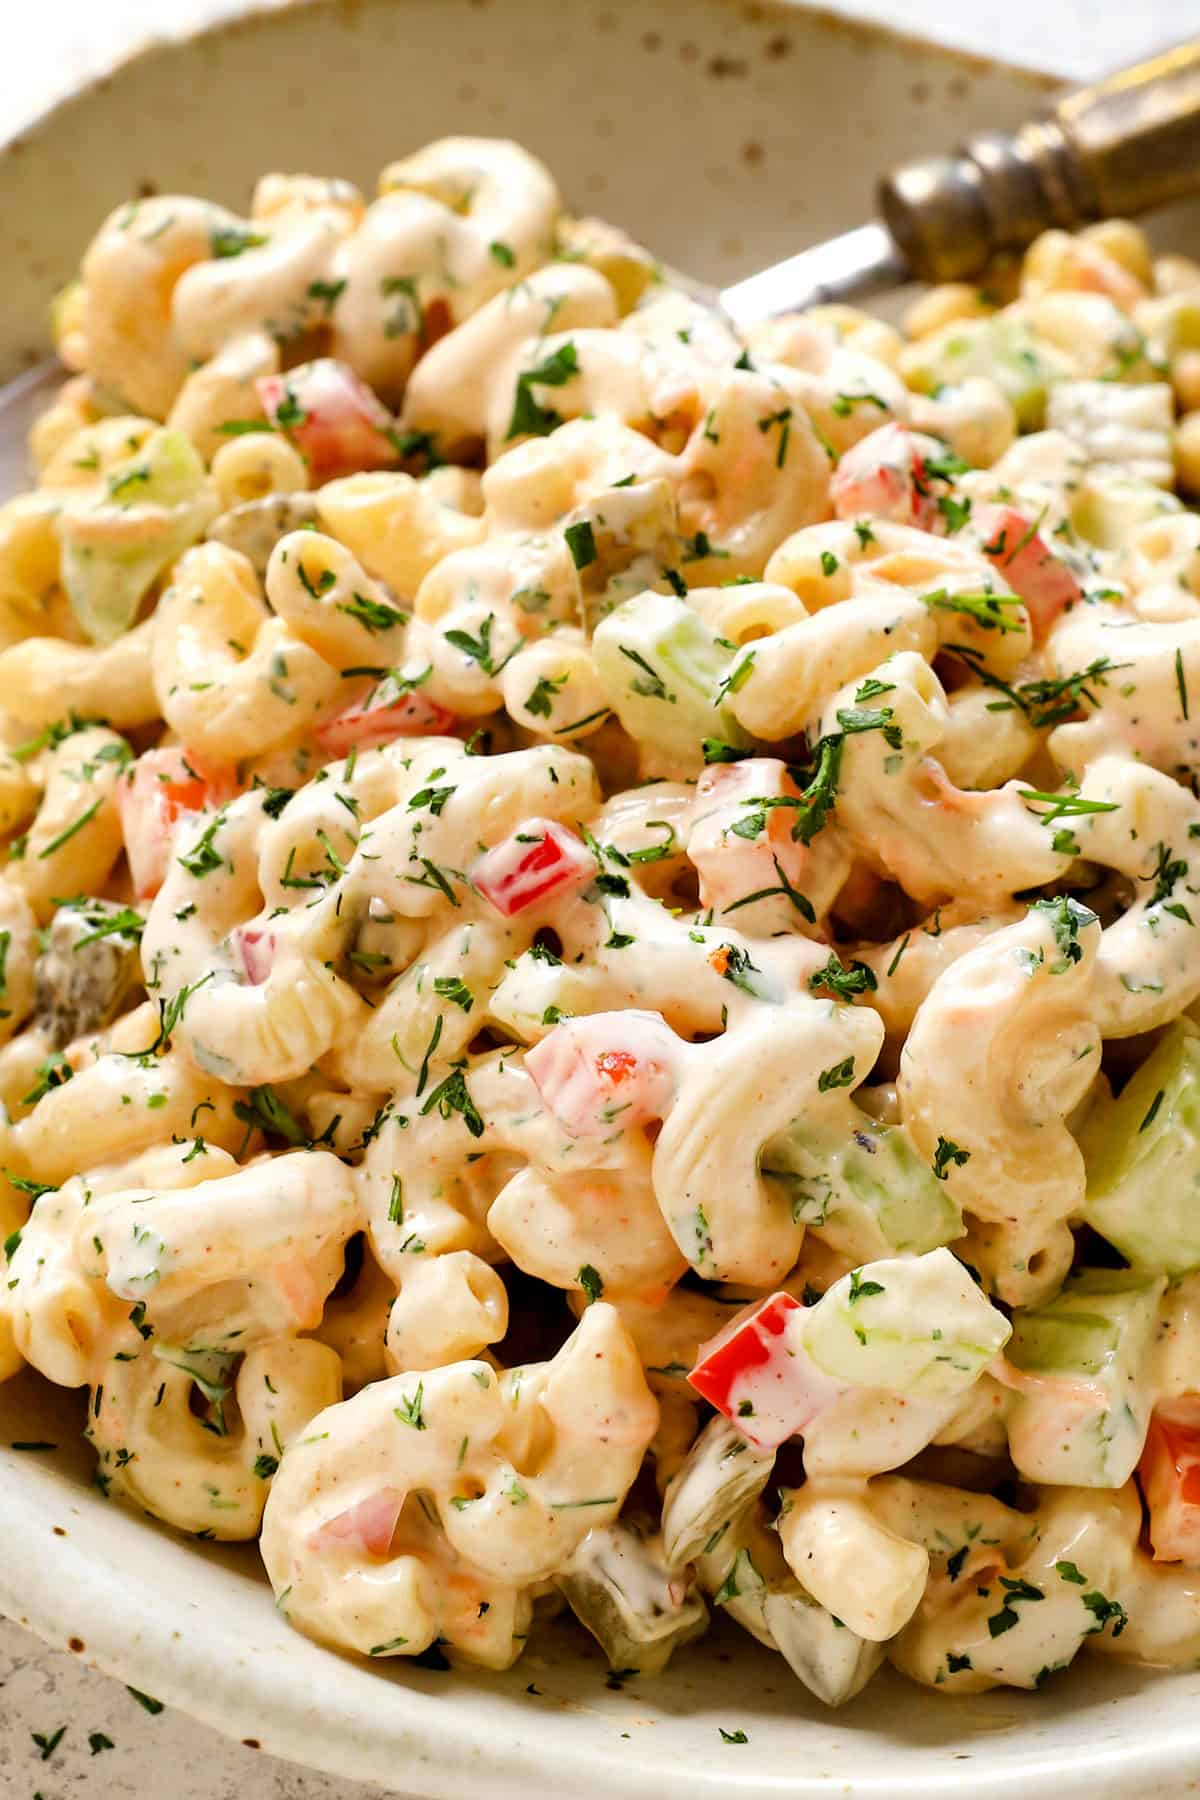 serving macaroni salad recipe on a plate garnished with dill 